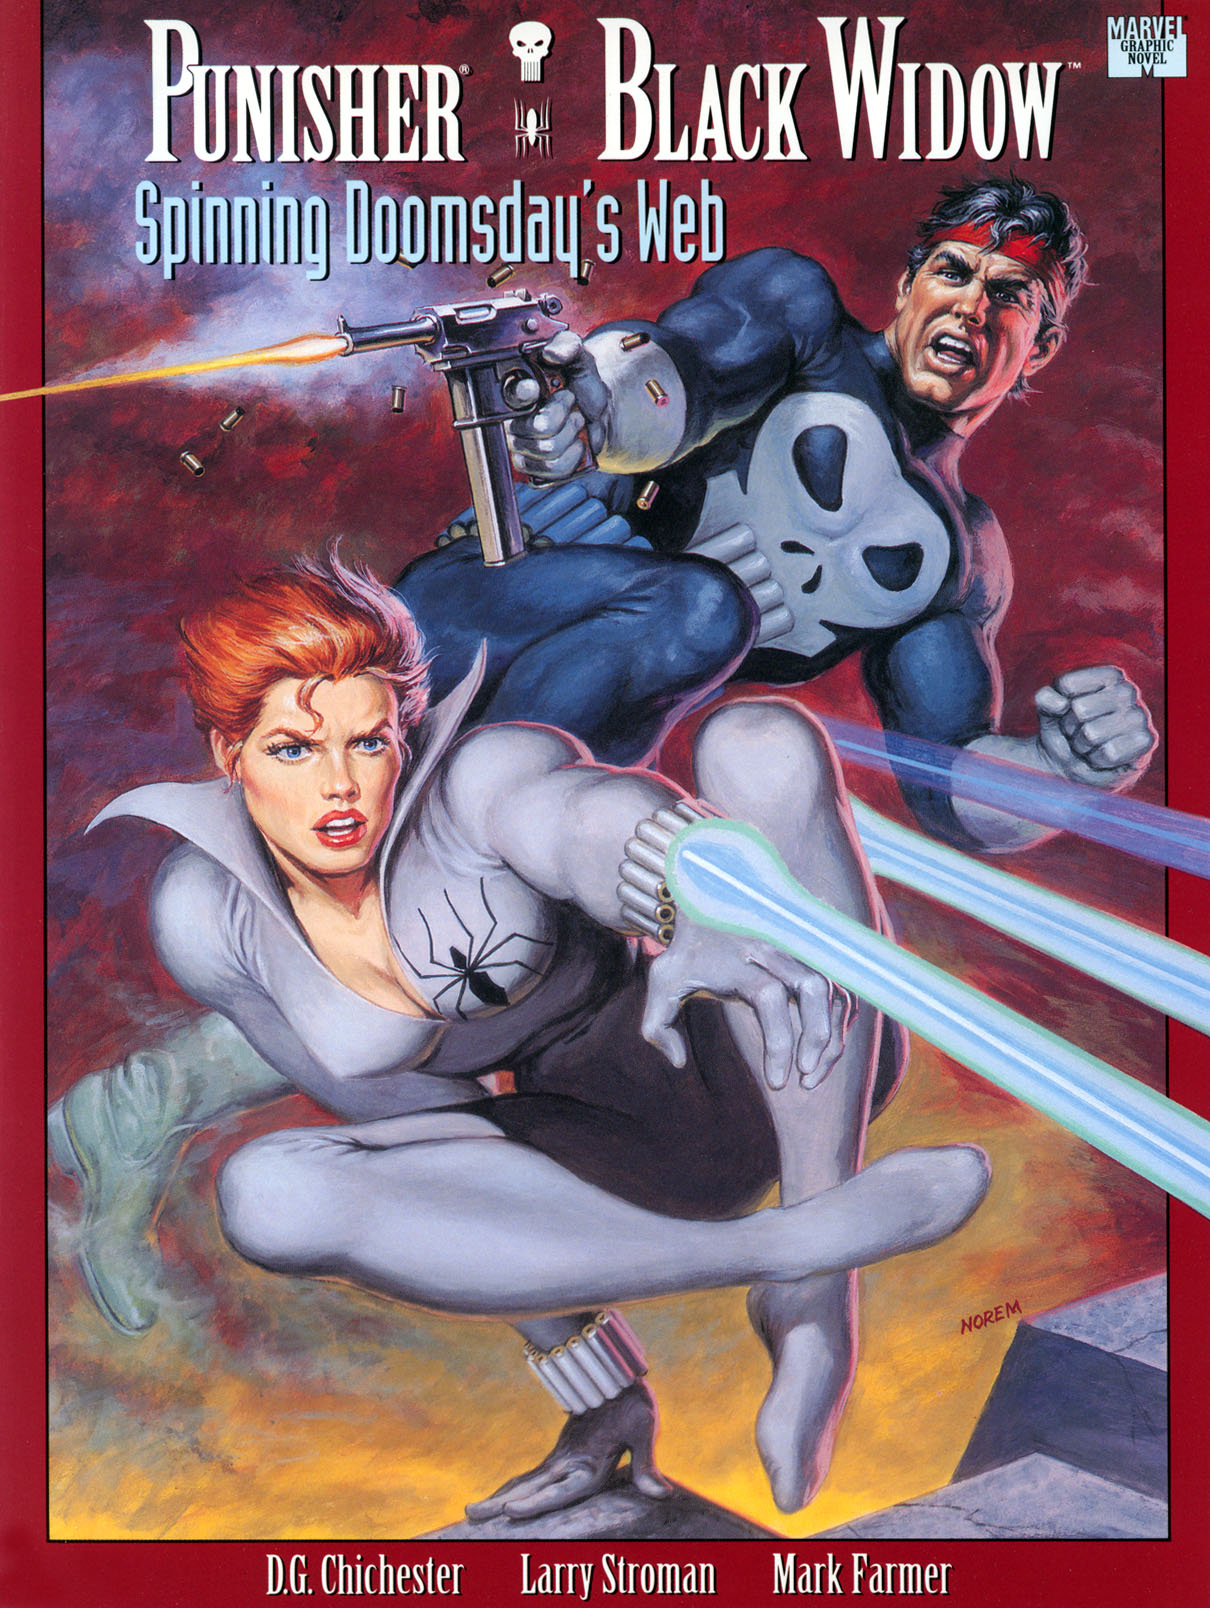 Marvel Graphic Novel Issue 74 Punisher Black Widow Spinning Doomsday S Web  | Read Marvel Graphic Novel Issue 74 Punisher Black Widow Spinning Doomsday  S Web comic online in high quality. Read